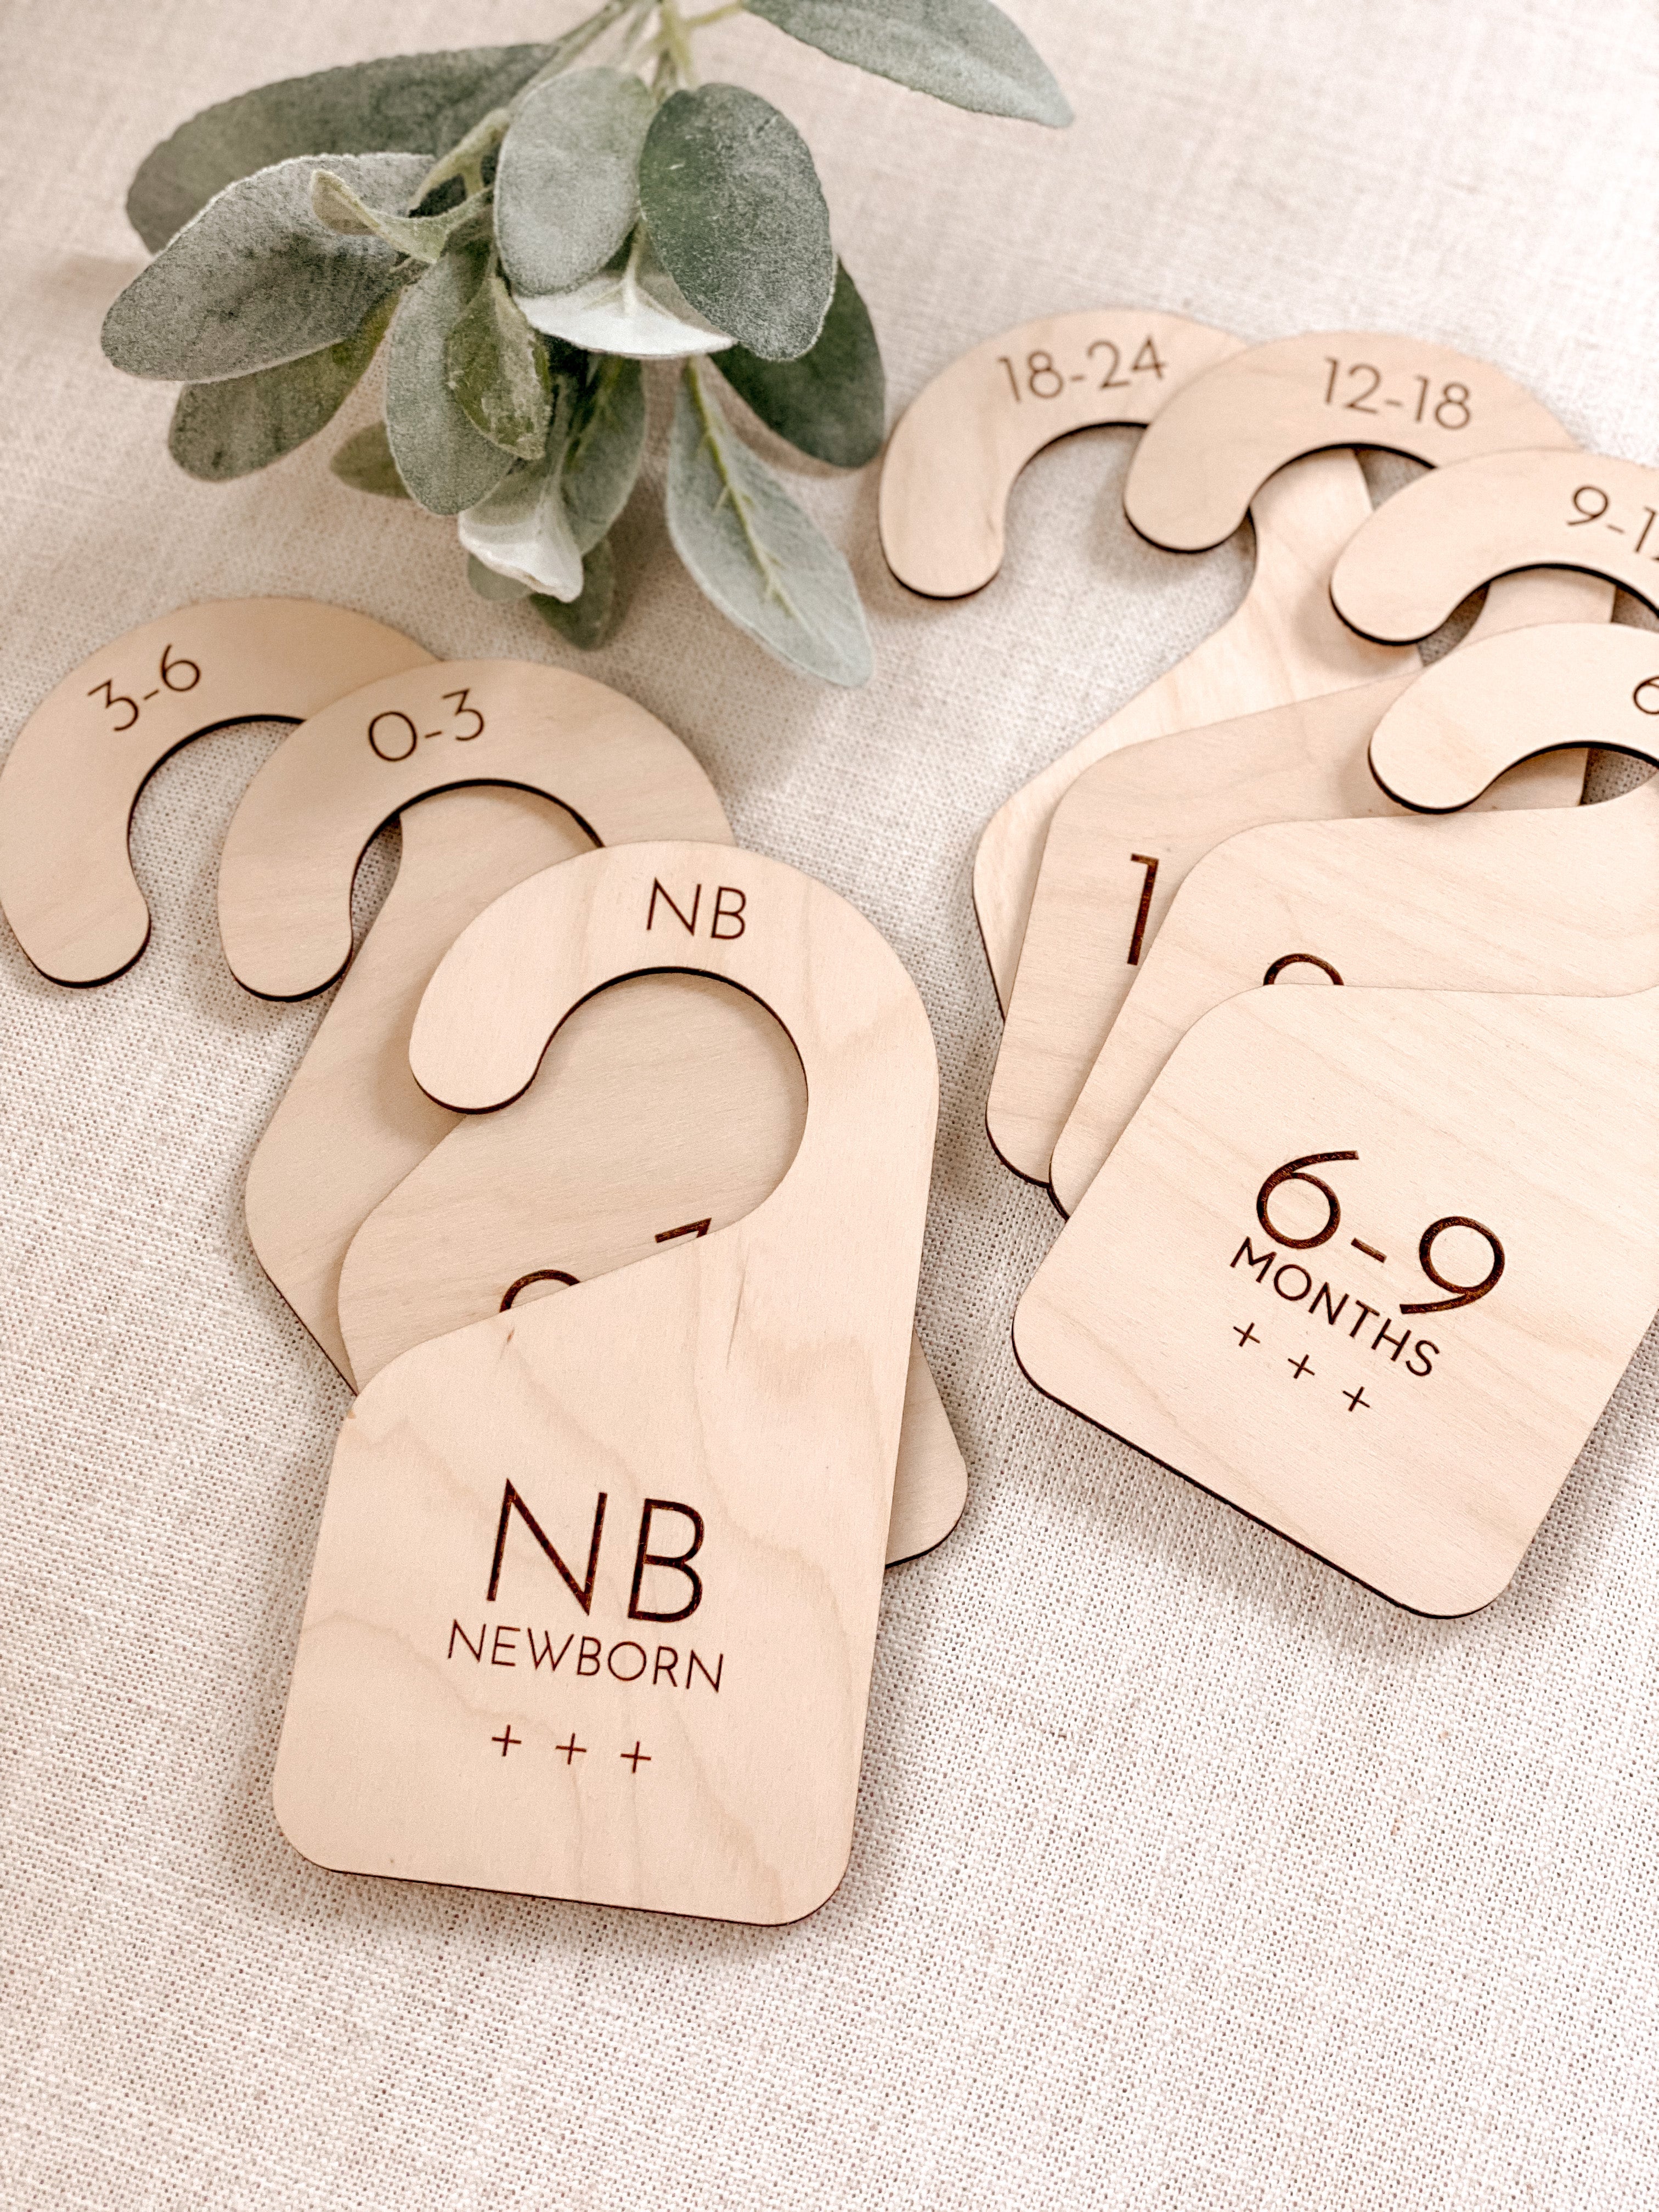 Toddler Closet Dividers | Wood Organizing Hangers for Kids